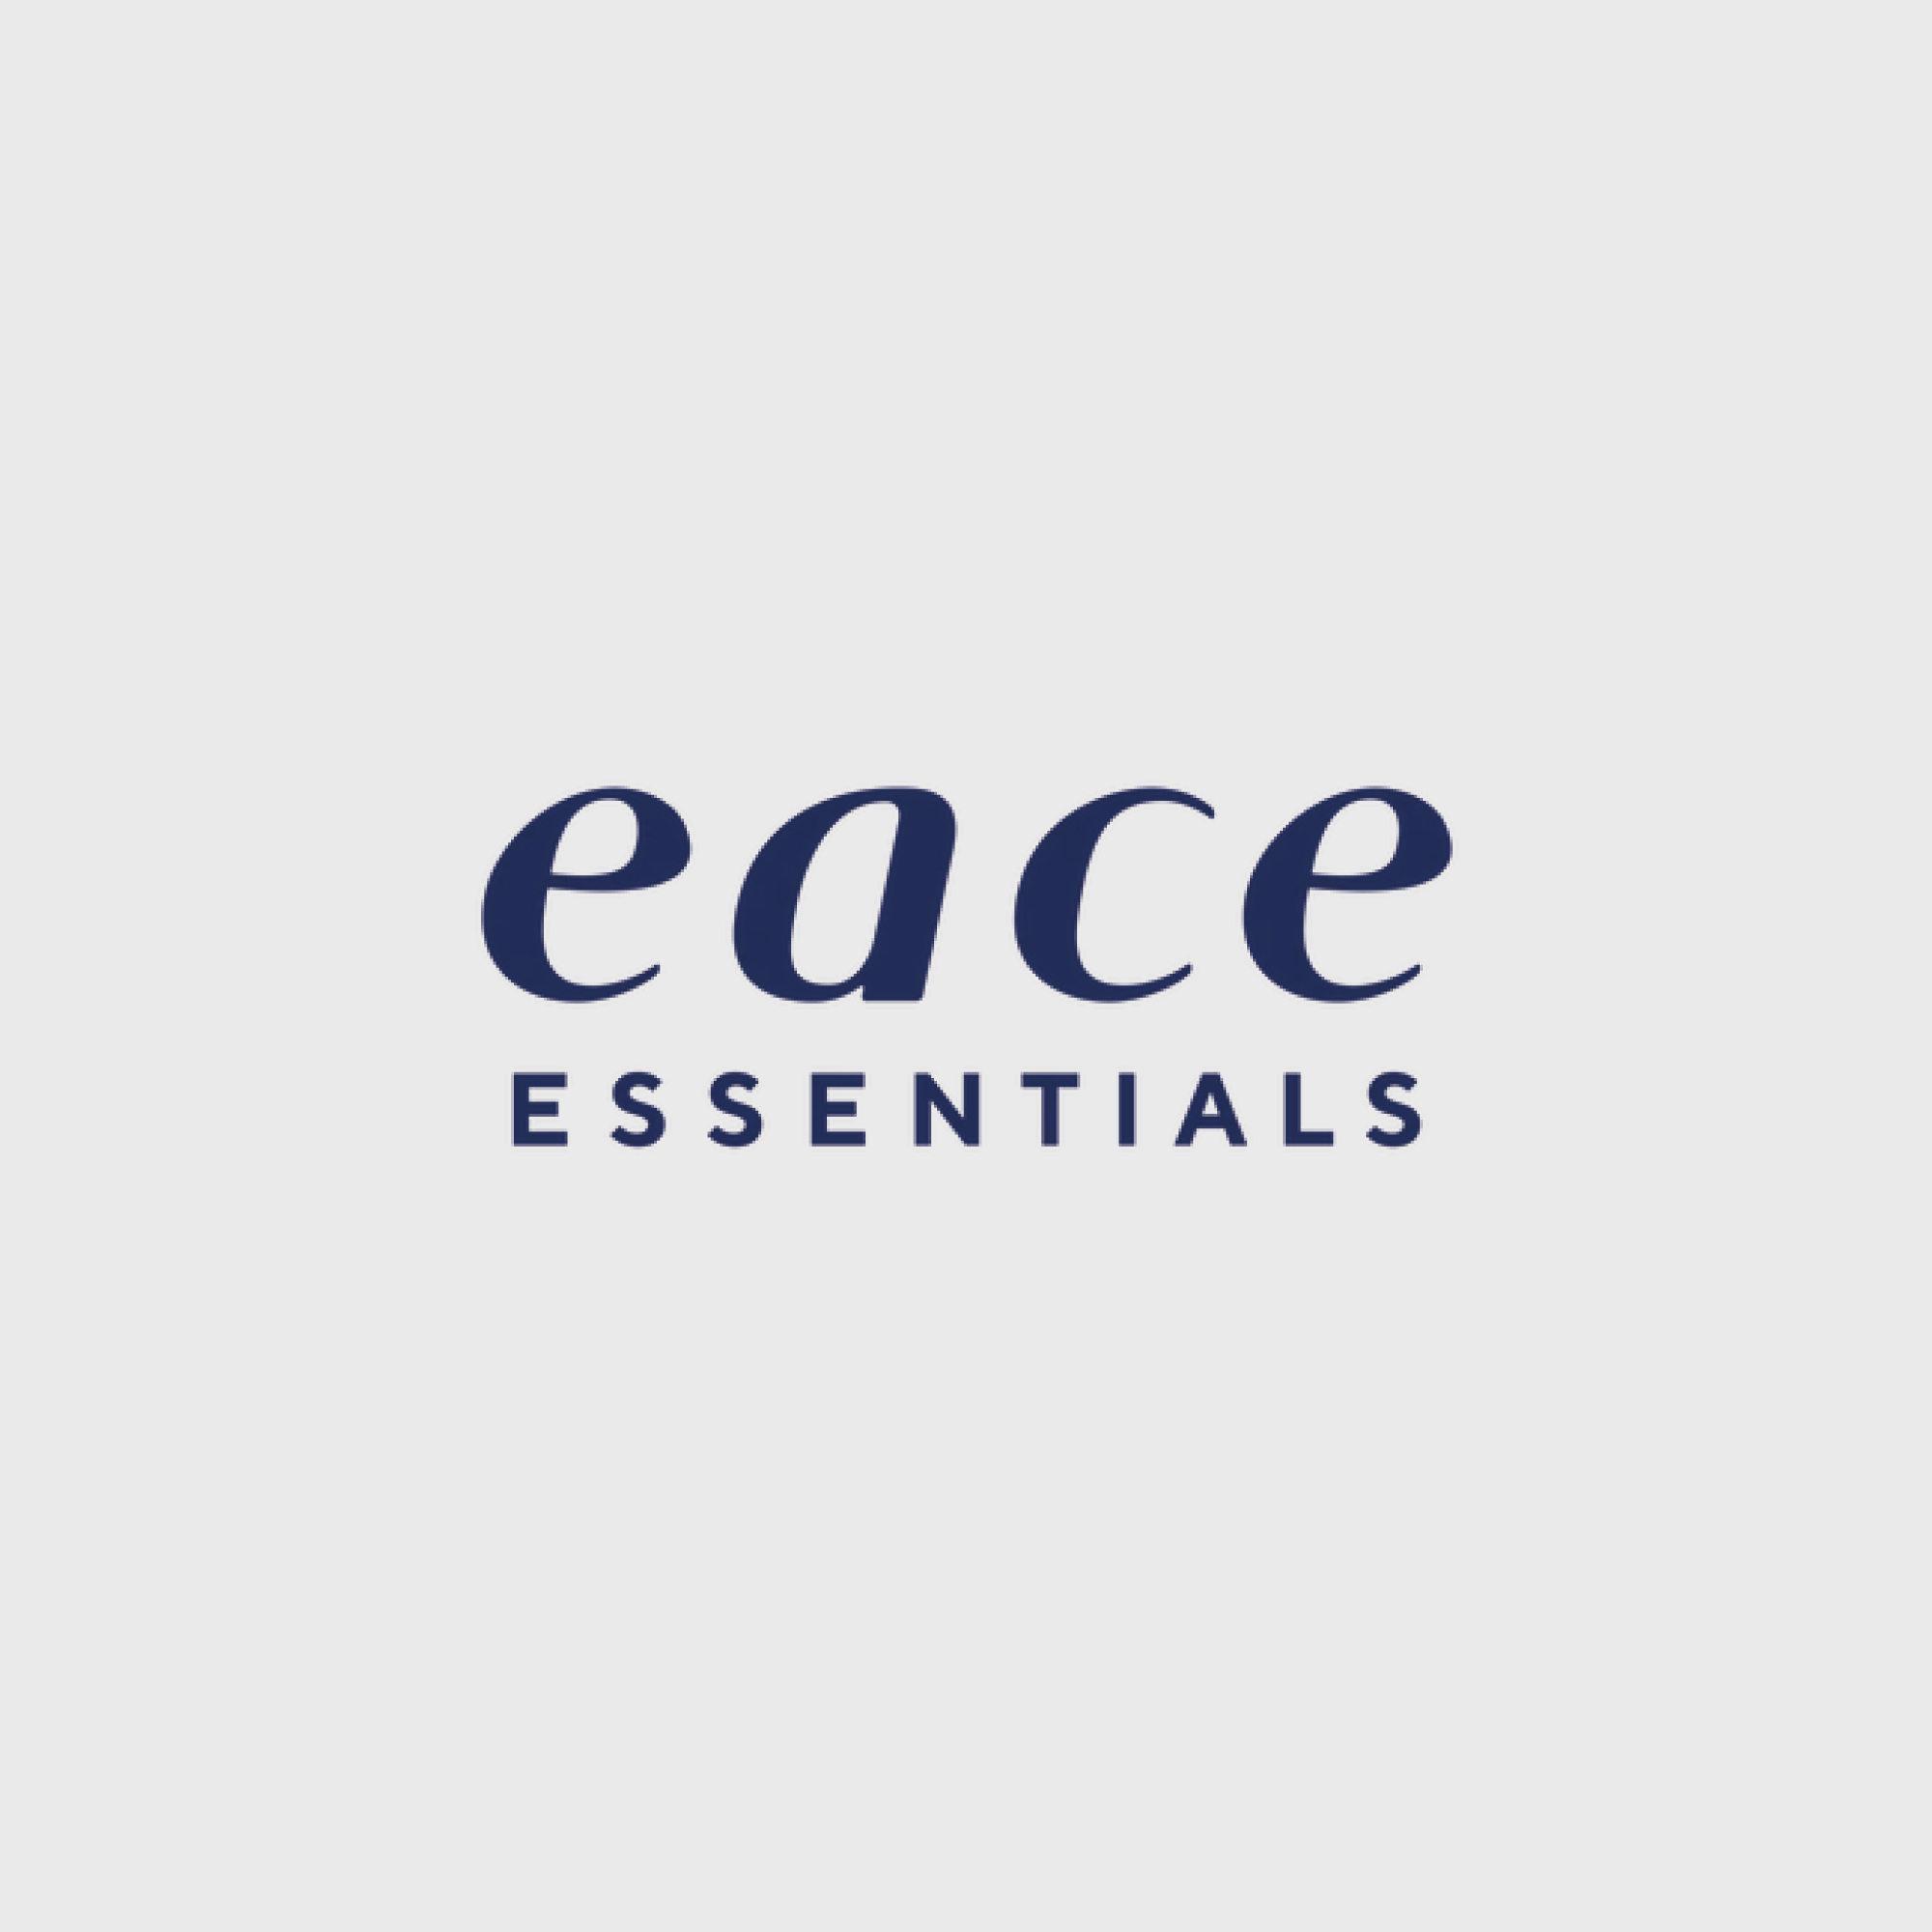 Eace Gum is a Danish startup